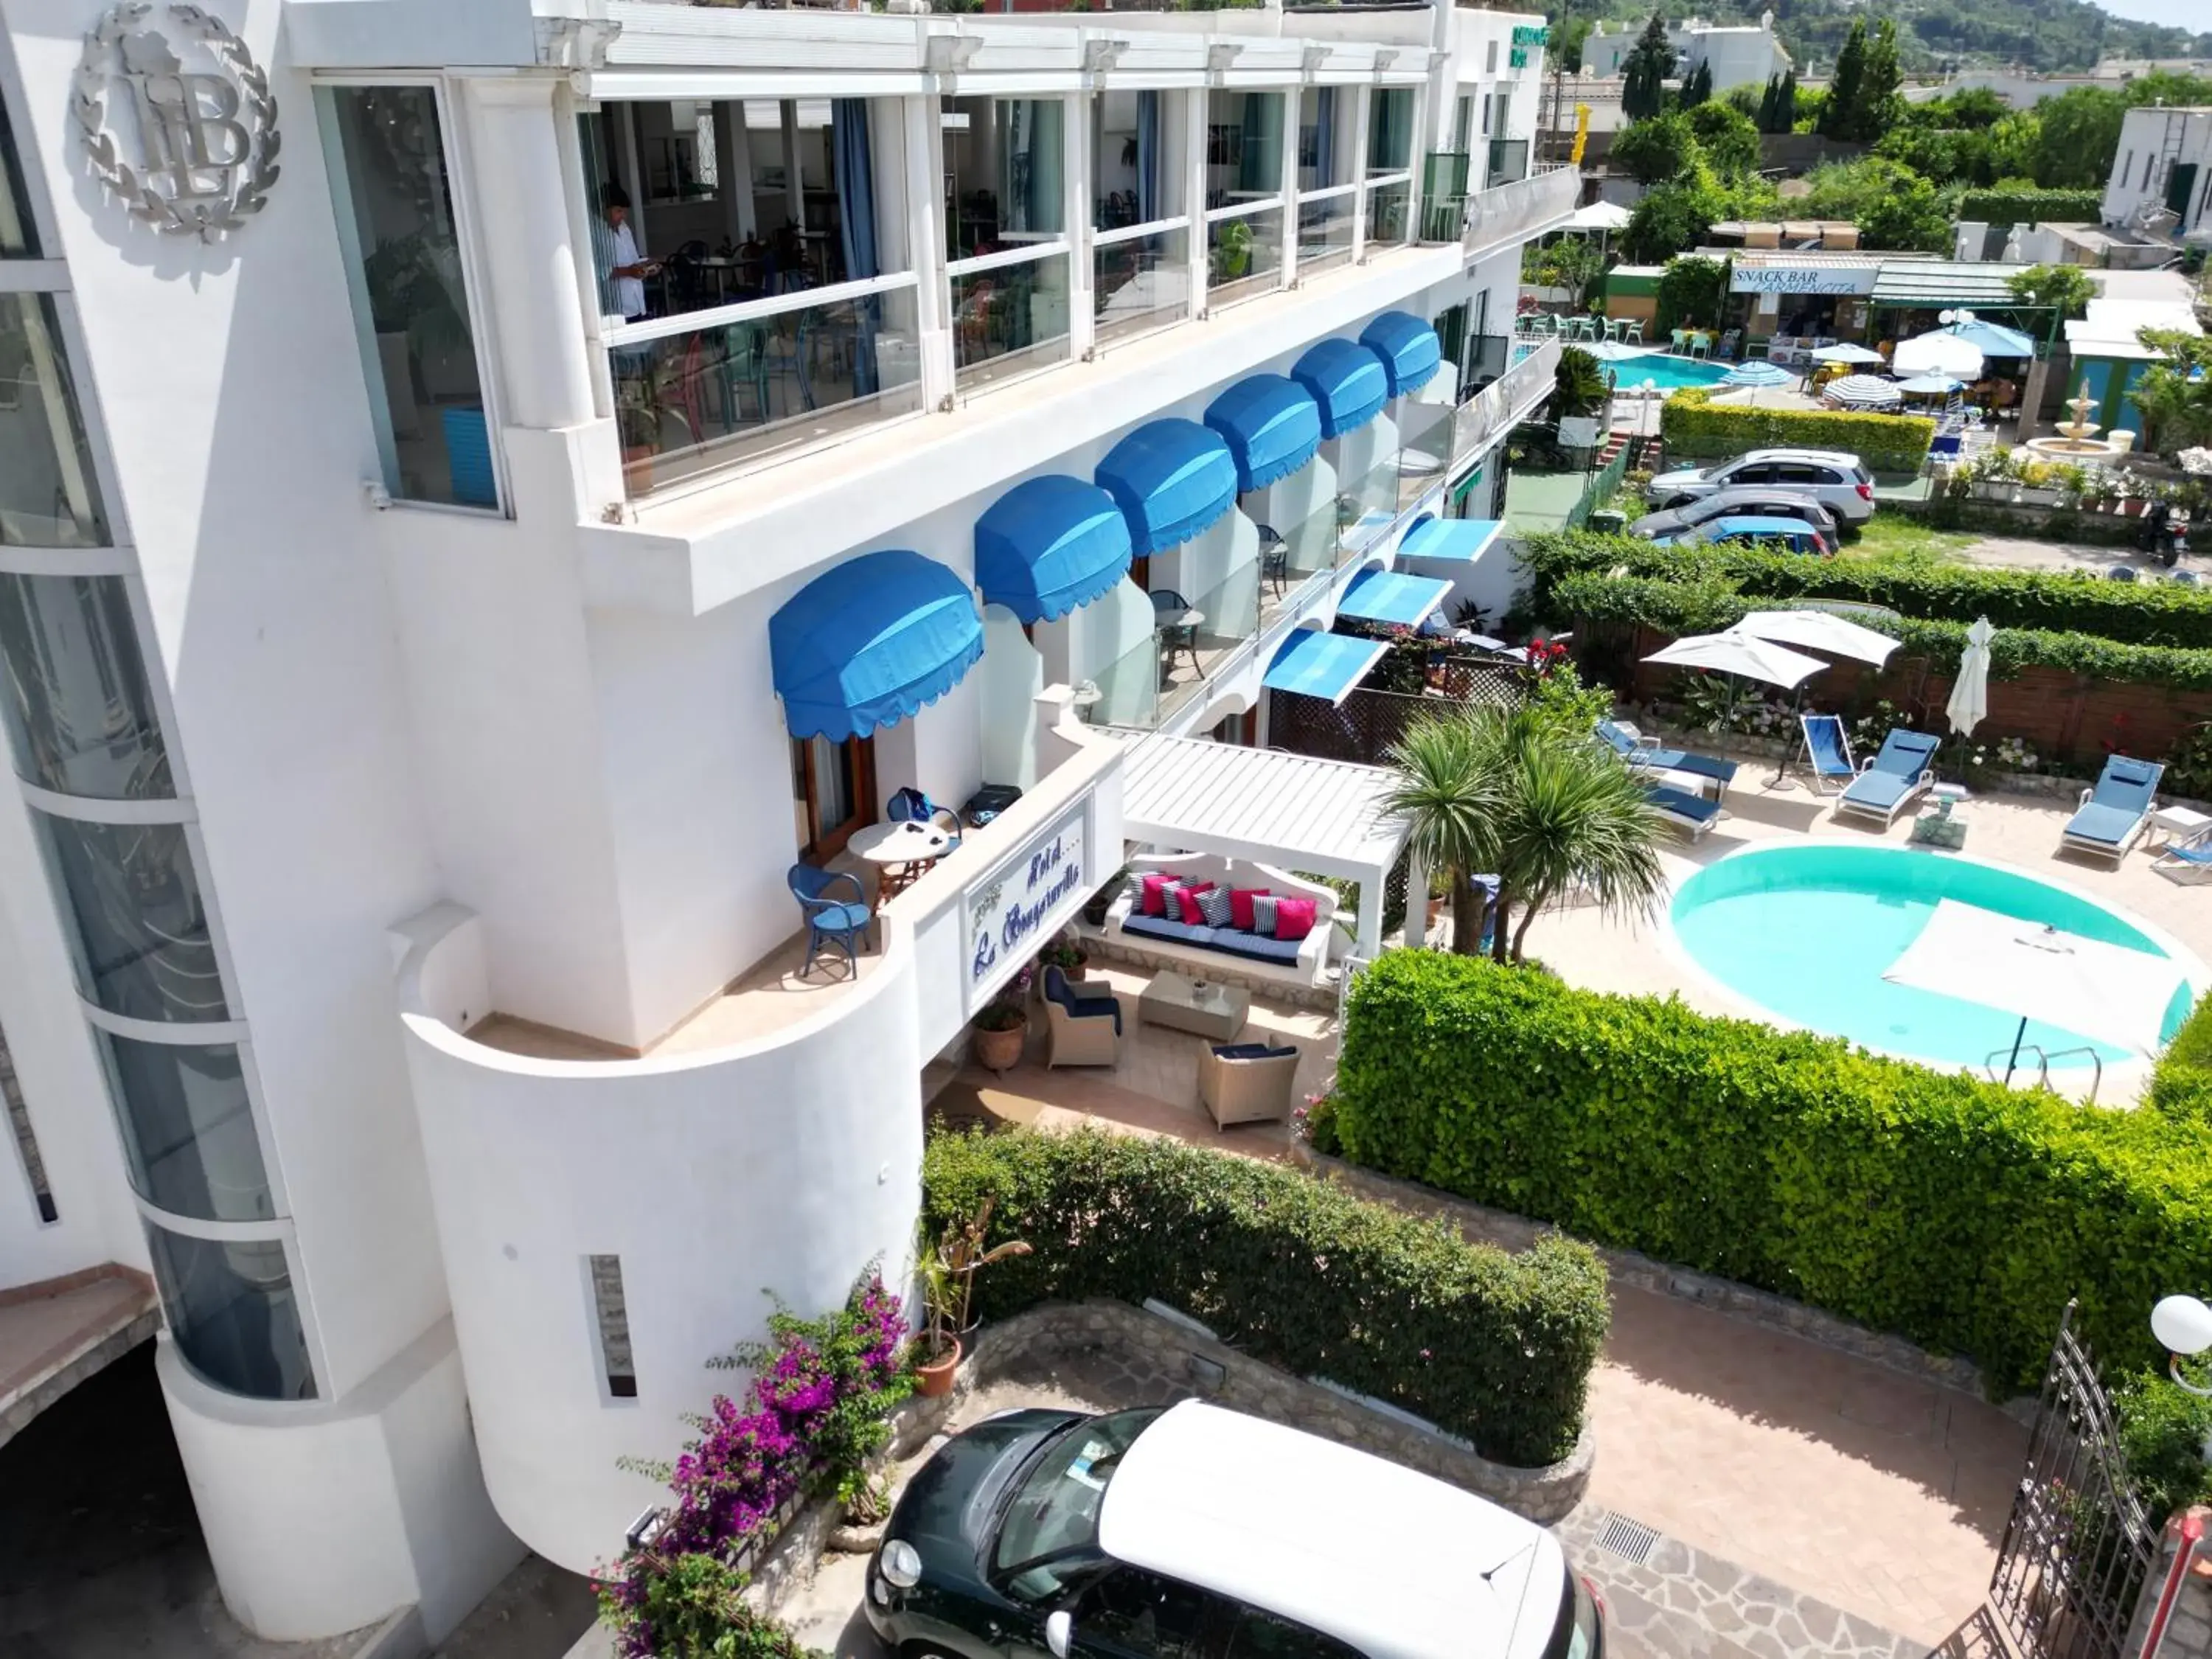 Property building, Pool View in Hotel Bougainville